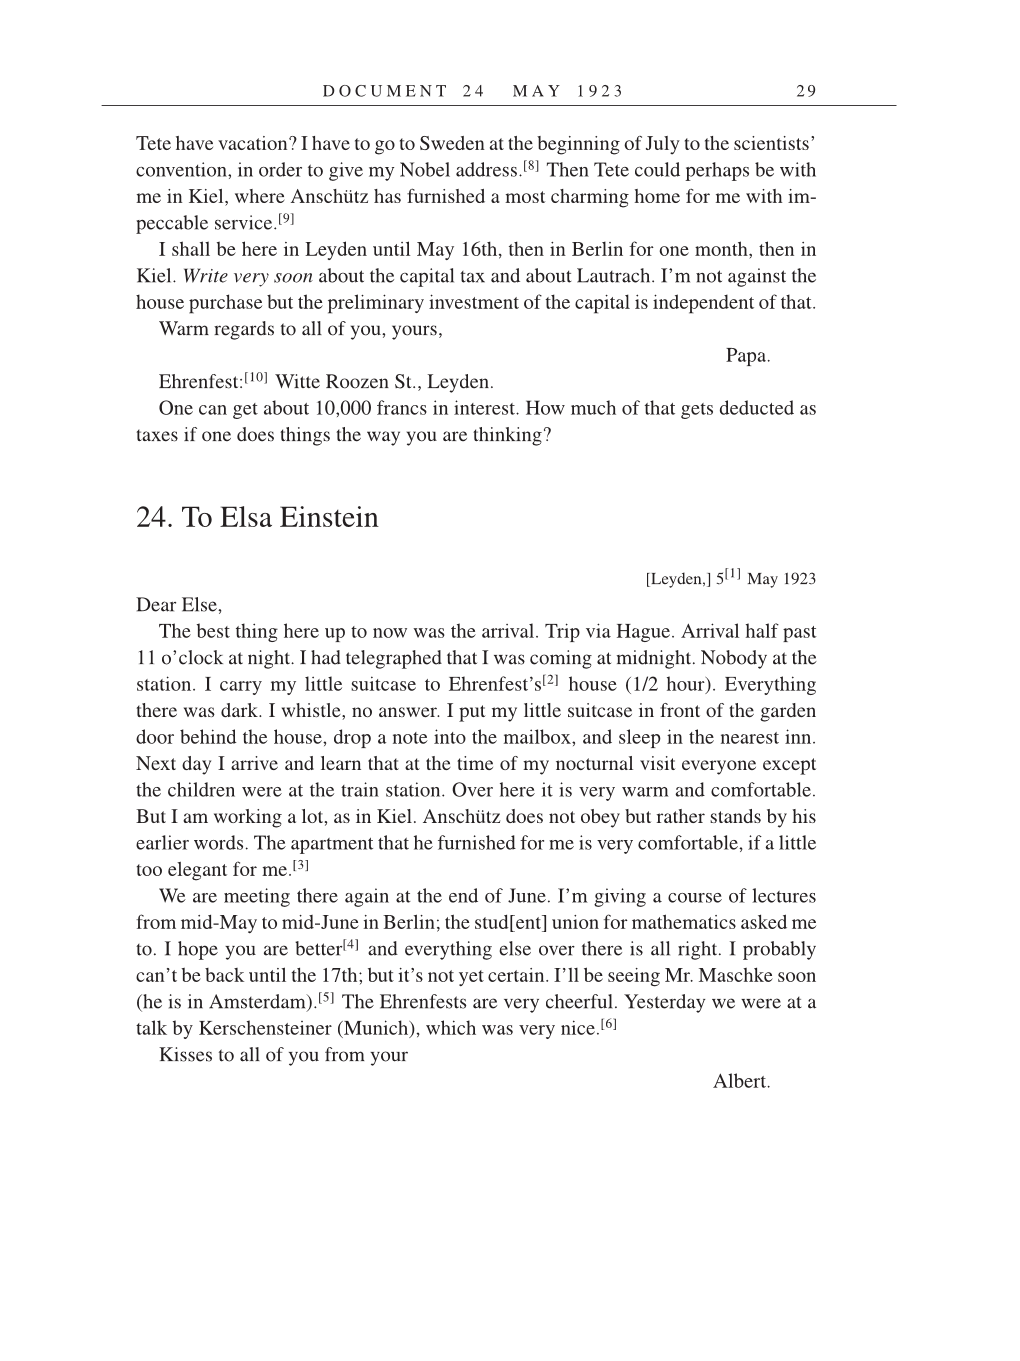 Volume 14: The Berlin Years: Writings & Correspondence, April 1923-May 1925 (English Translation Supplement) page 29